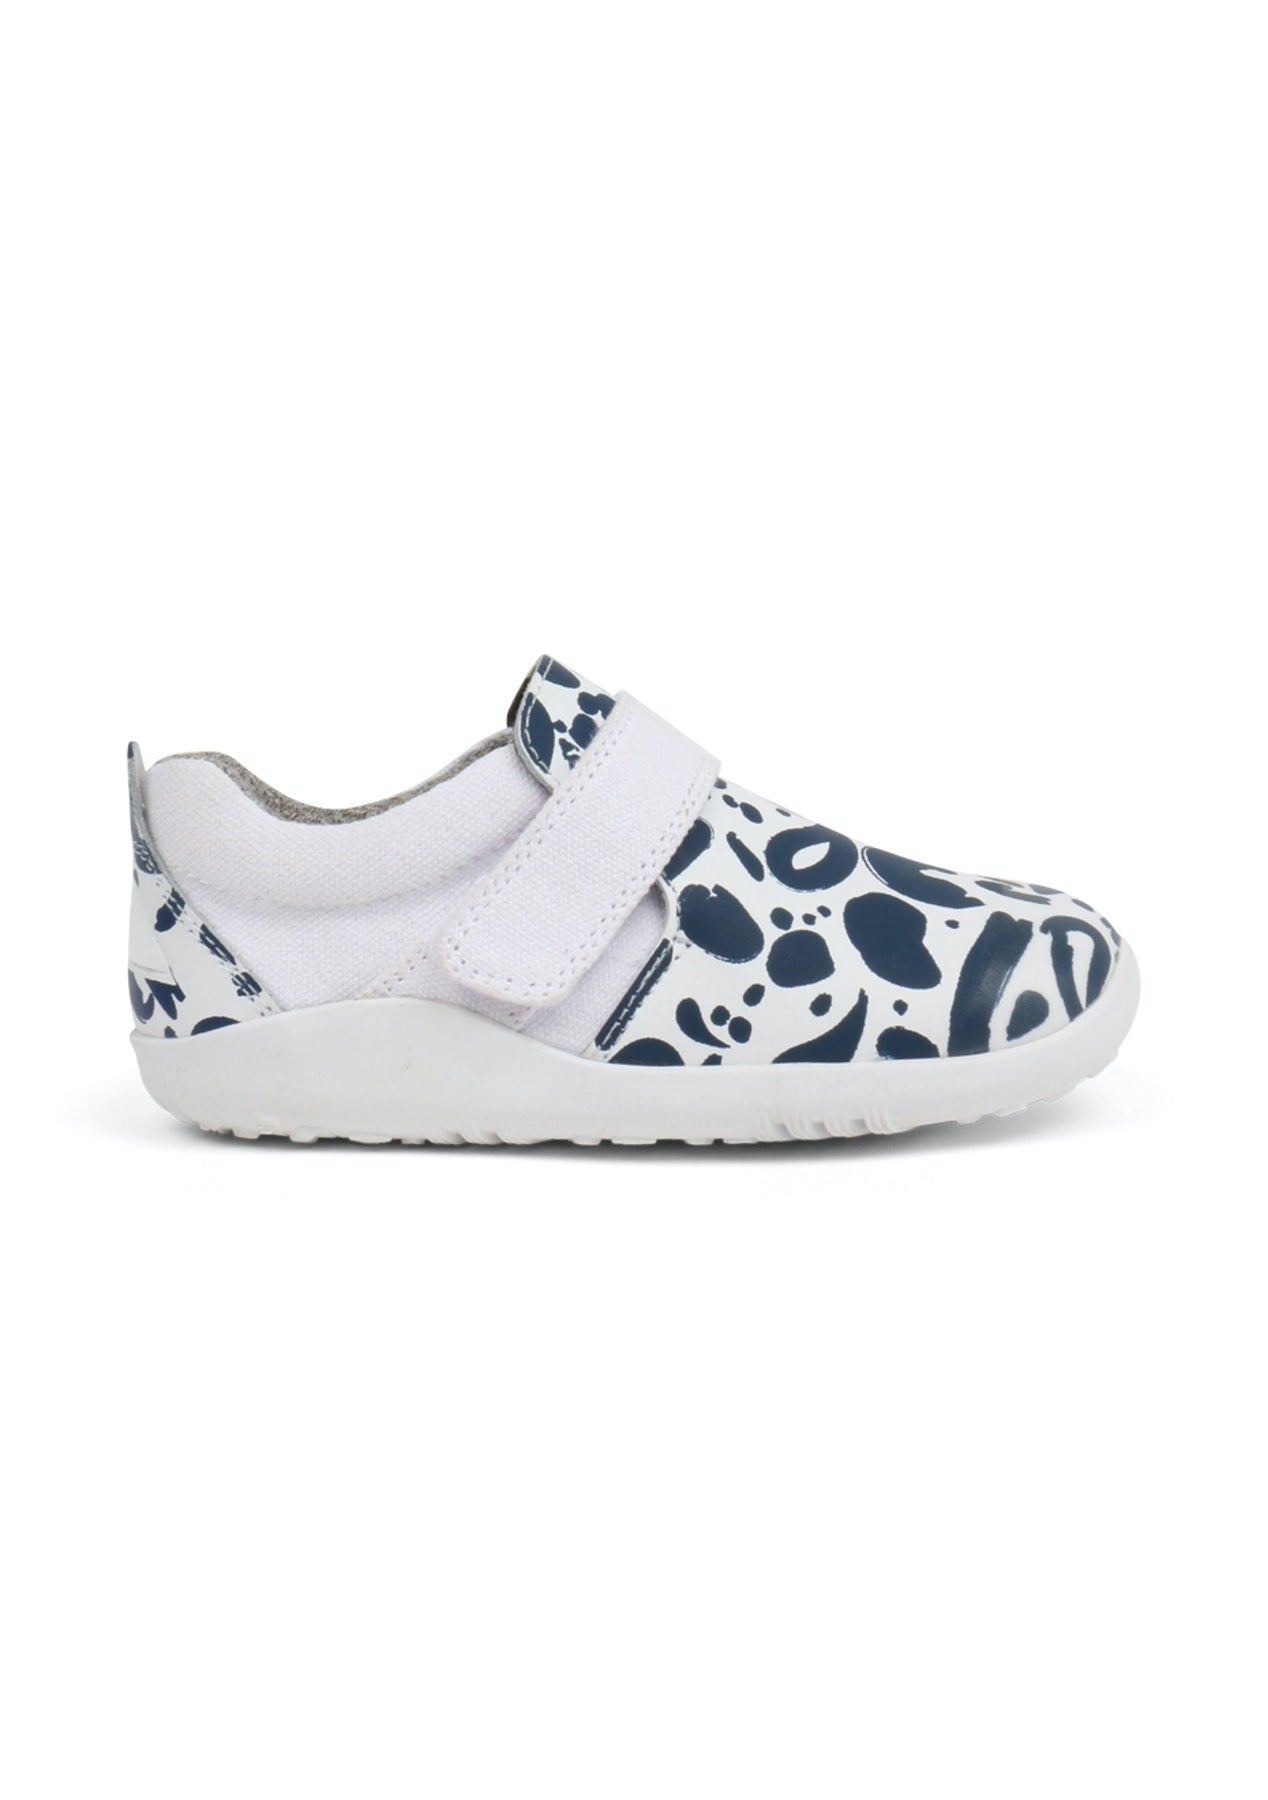 Bobux Kids Abstract White and Navy Shoes